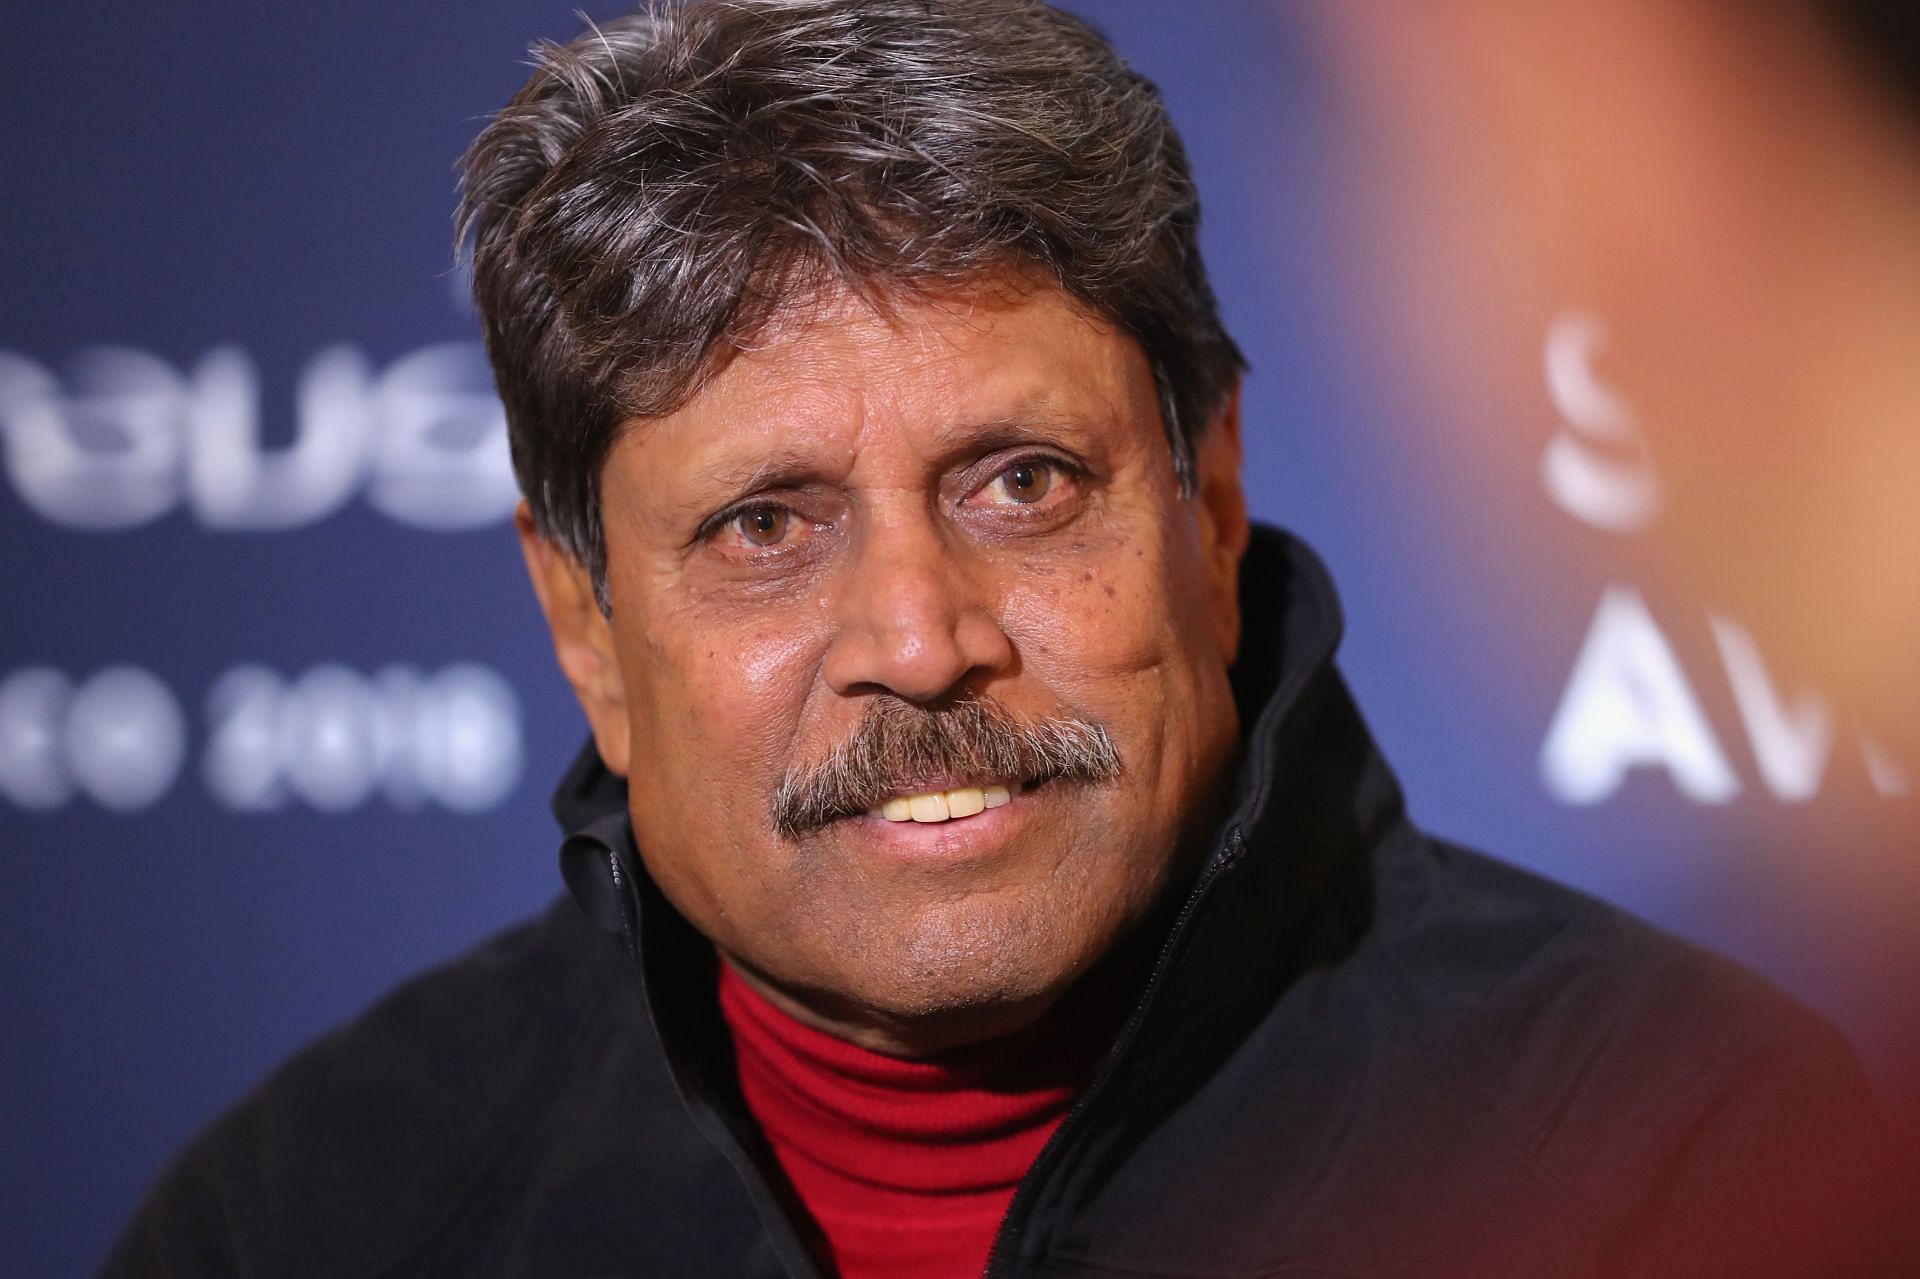 Kapil Dev captained the Indian 1983 World Cup squad